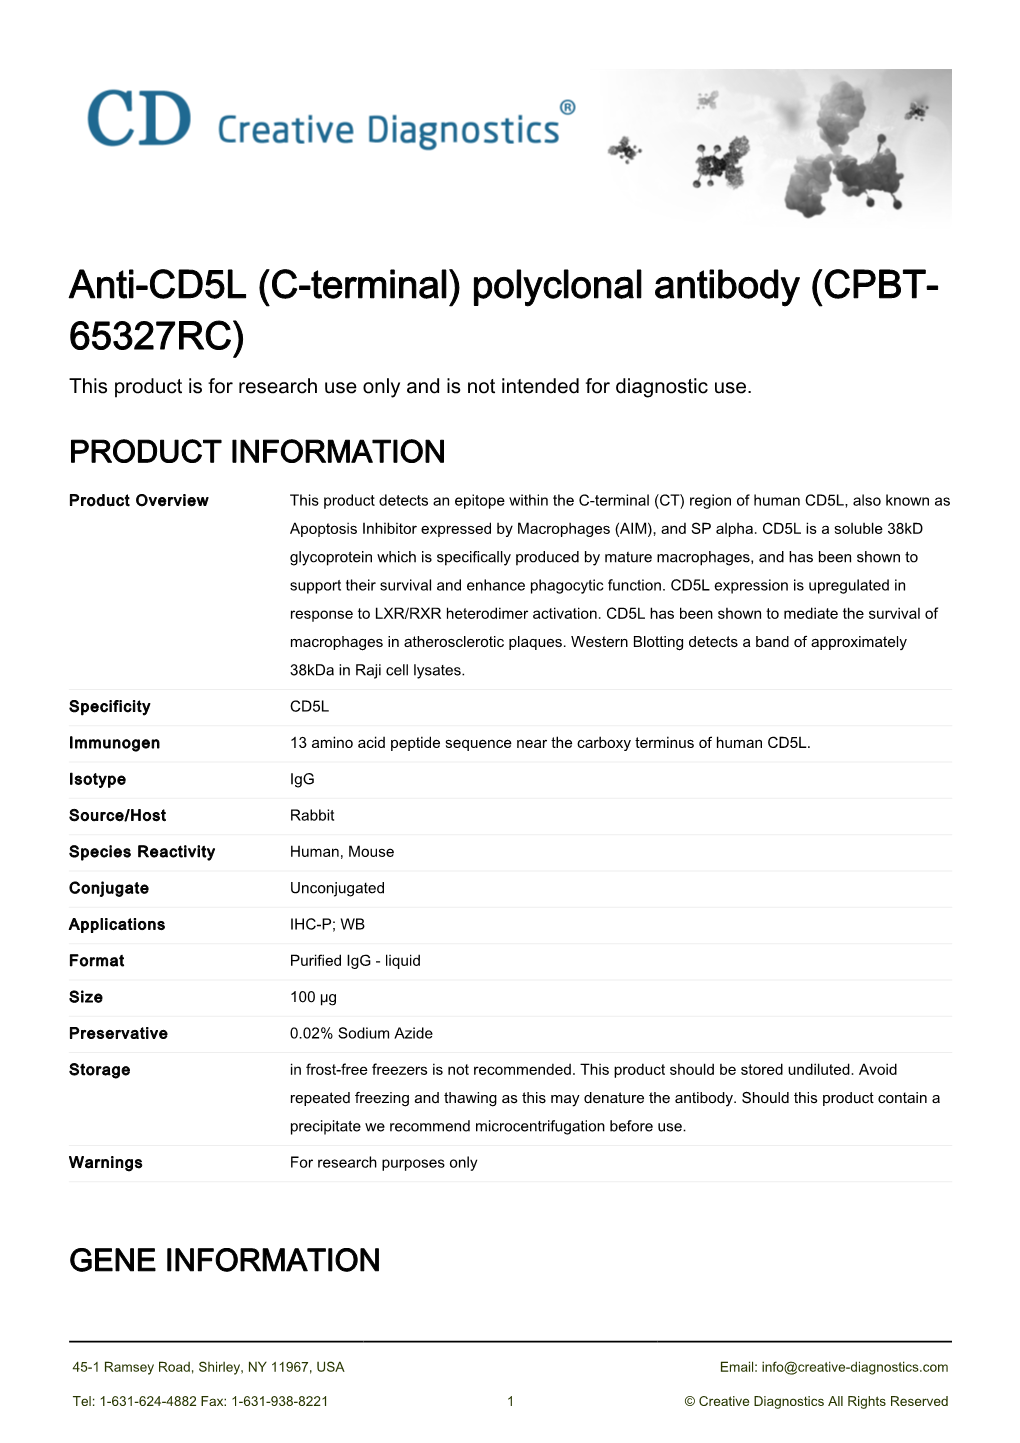 Anti-CD5L (C-Terminal) Polyclonal Antibody (CPBT- 65327RC) This Product Is for Research Use Only and Is Not Intended for Diagnostic Use